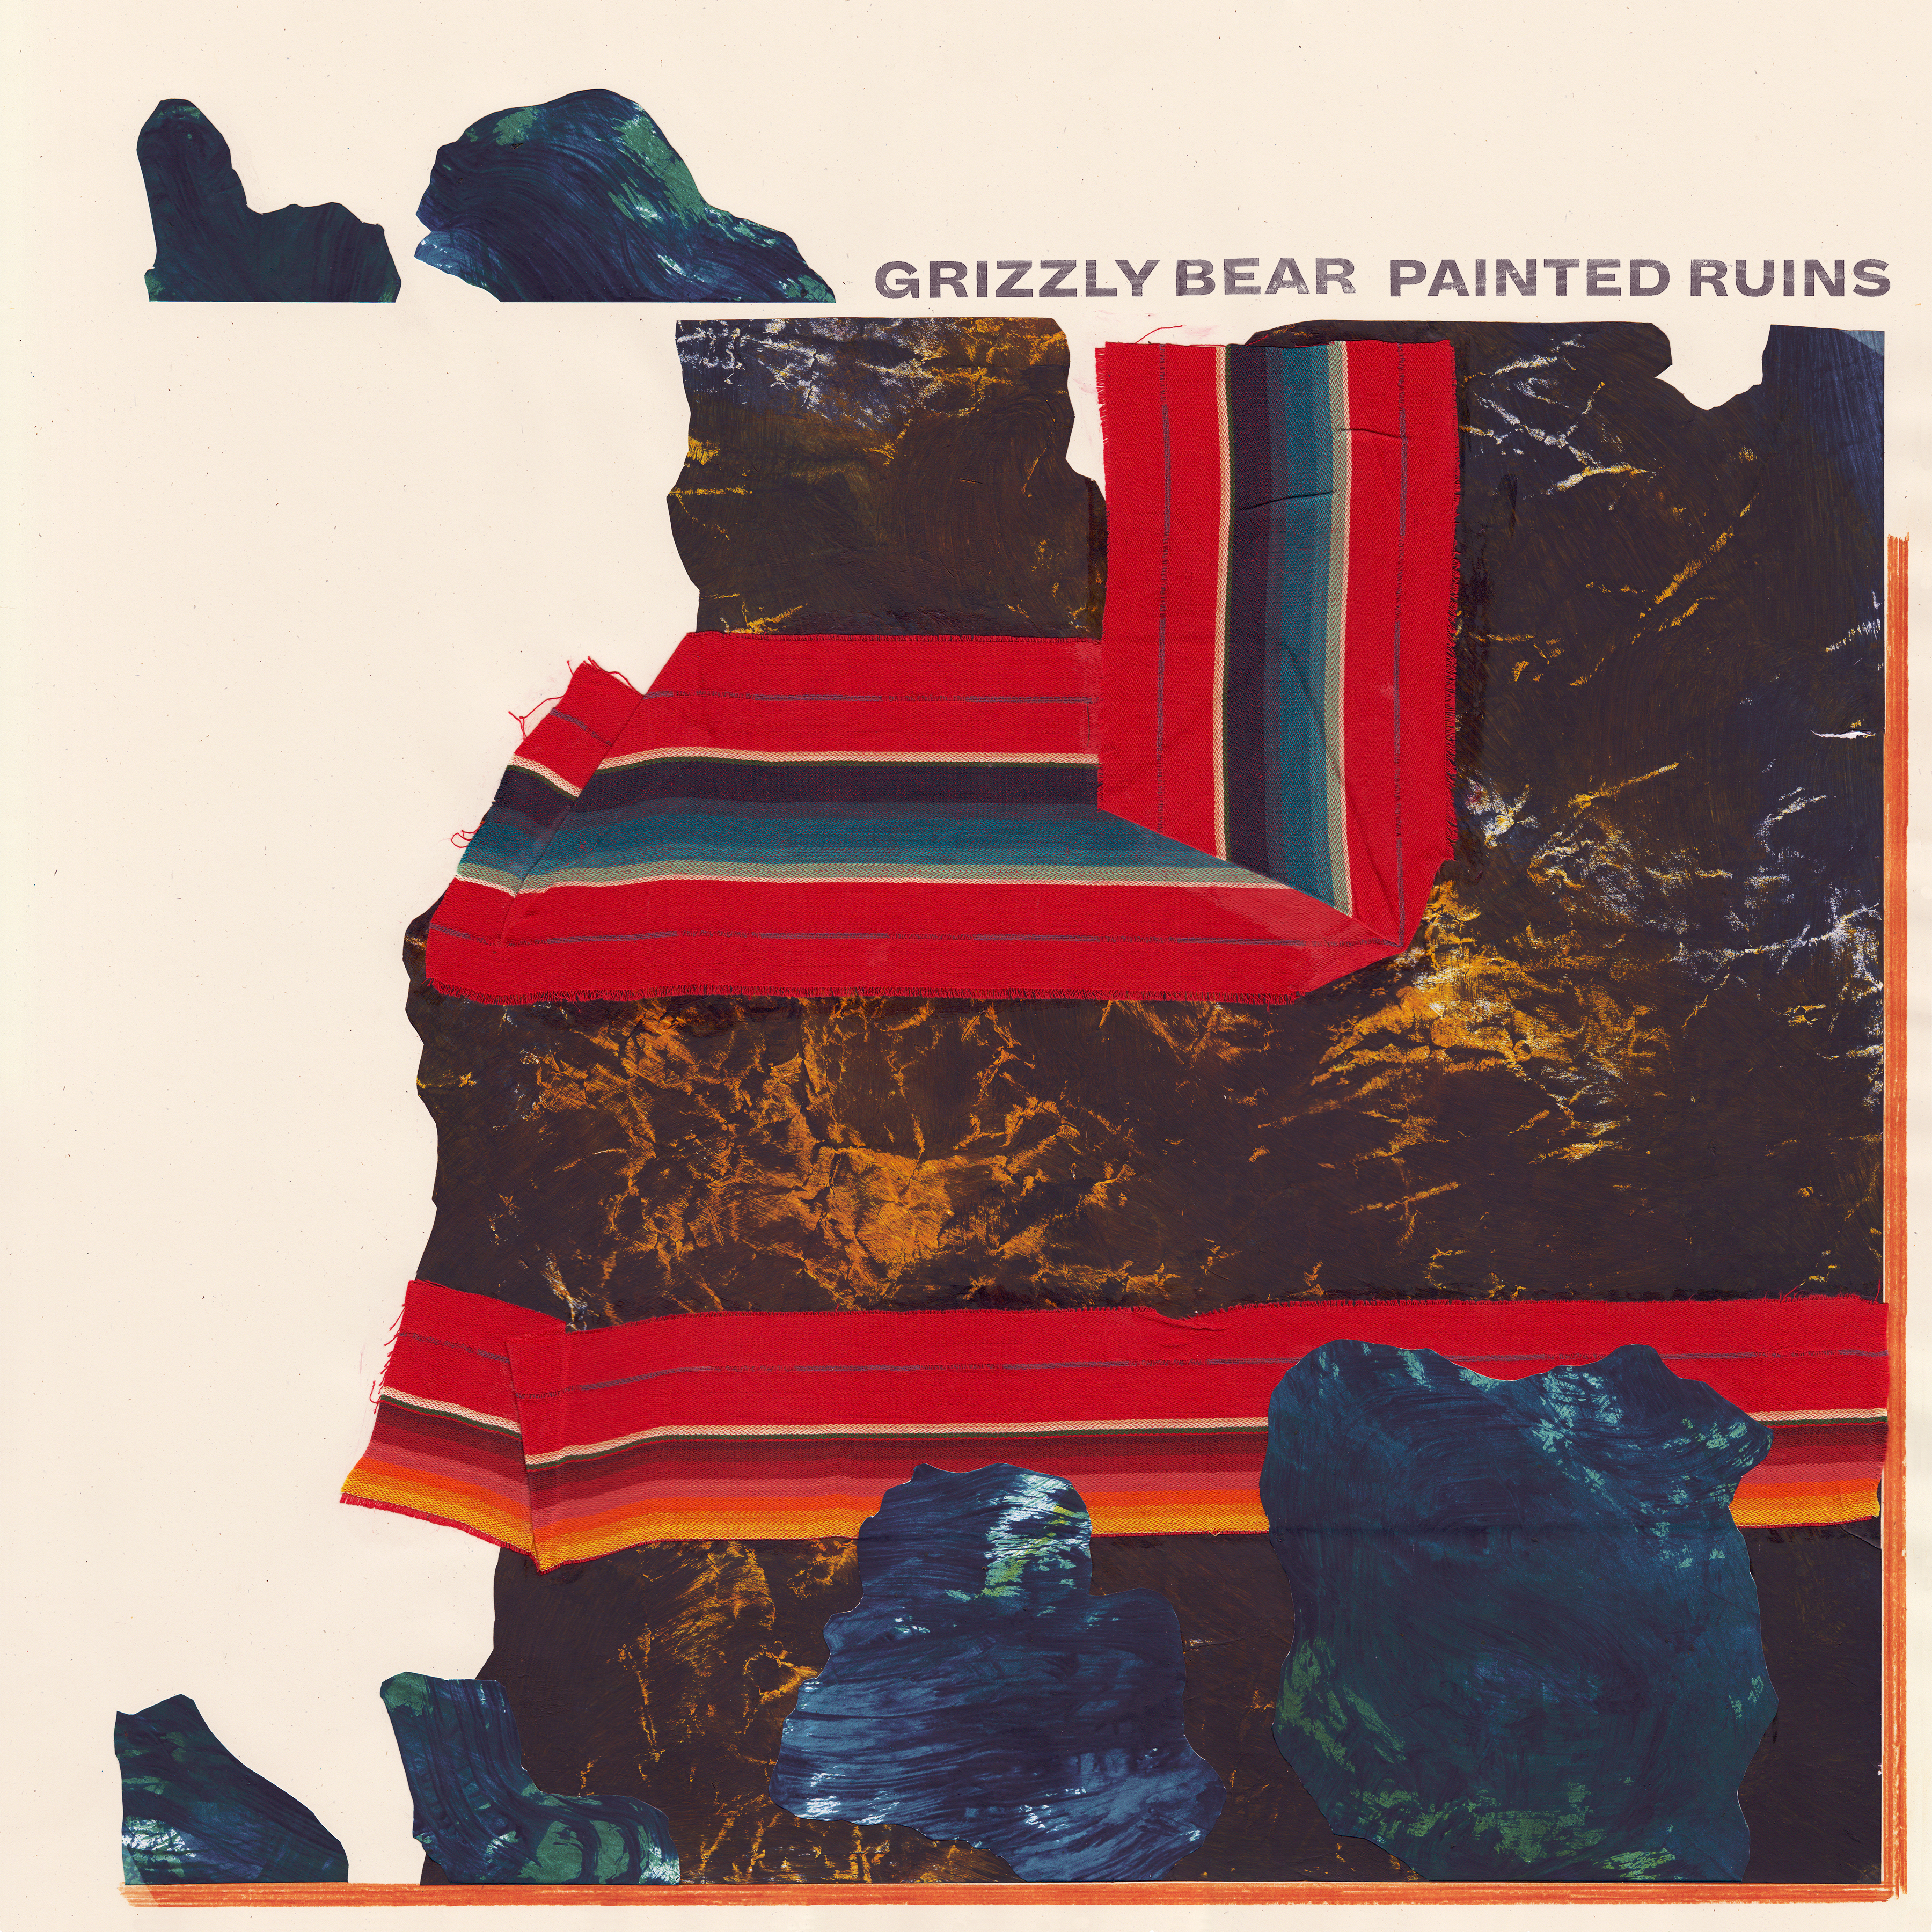 Grizzly Bear Announce New Album <i></noscript>Painted Ruins</i>, Share World Tour Dates” title=”Grizzly_Bear_Painted_Ruins_300dpi_12in_-_HiRes-1495051565″ data-original-id=”241021″ data-adjusted-id=”241021″ class=”sm_size_full_width sm_alignment_center ” data-image-source=”getty” />
<div class=